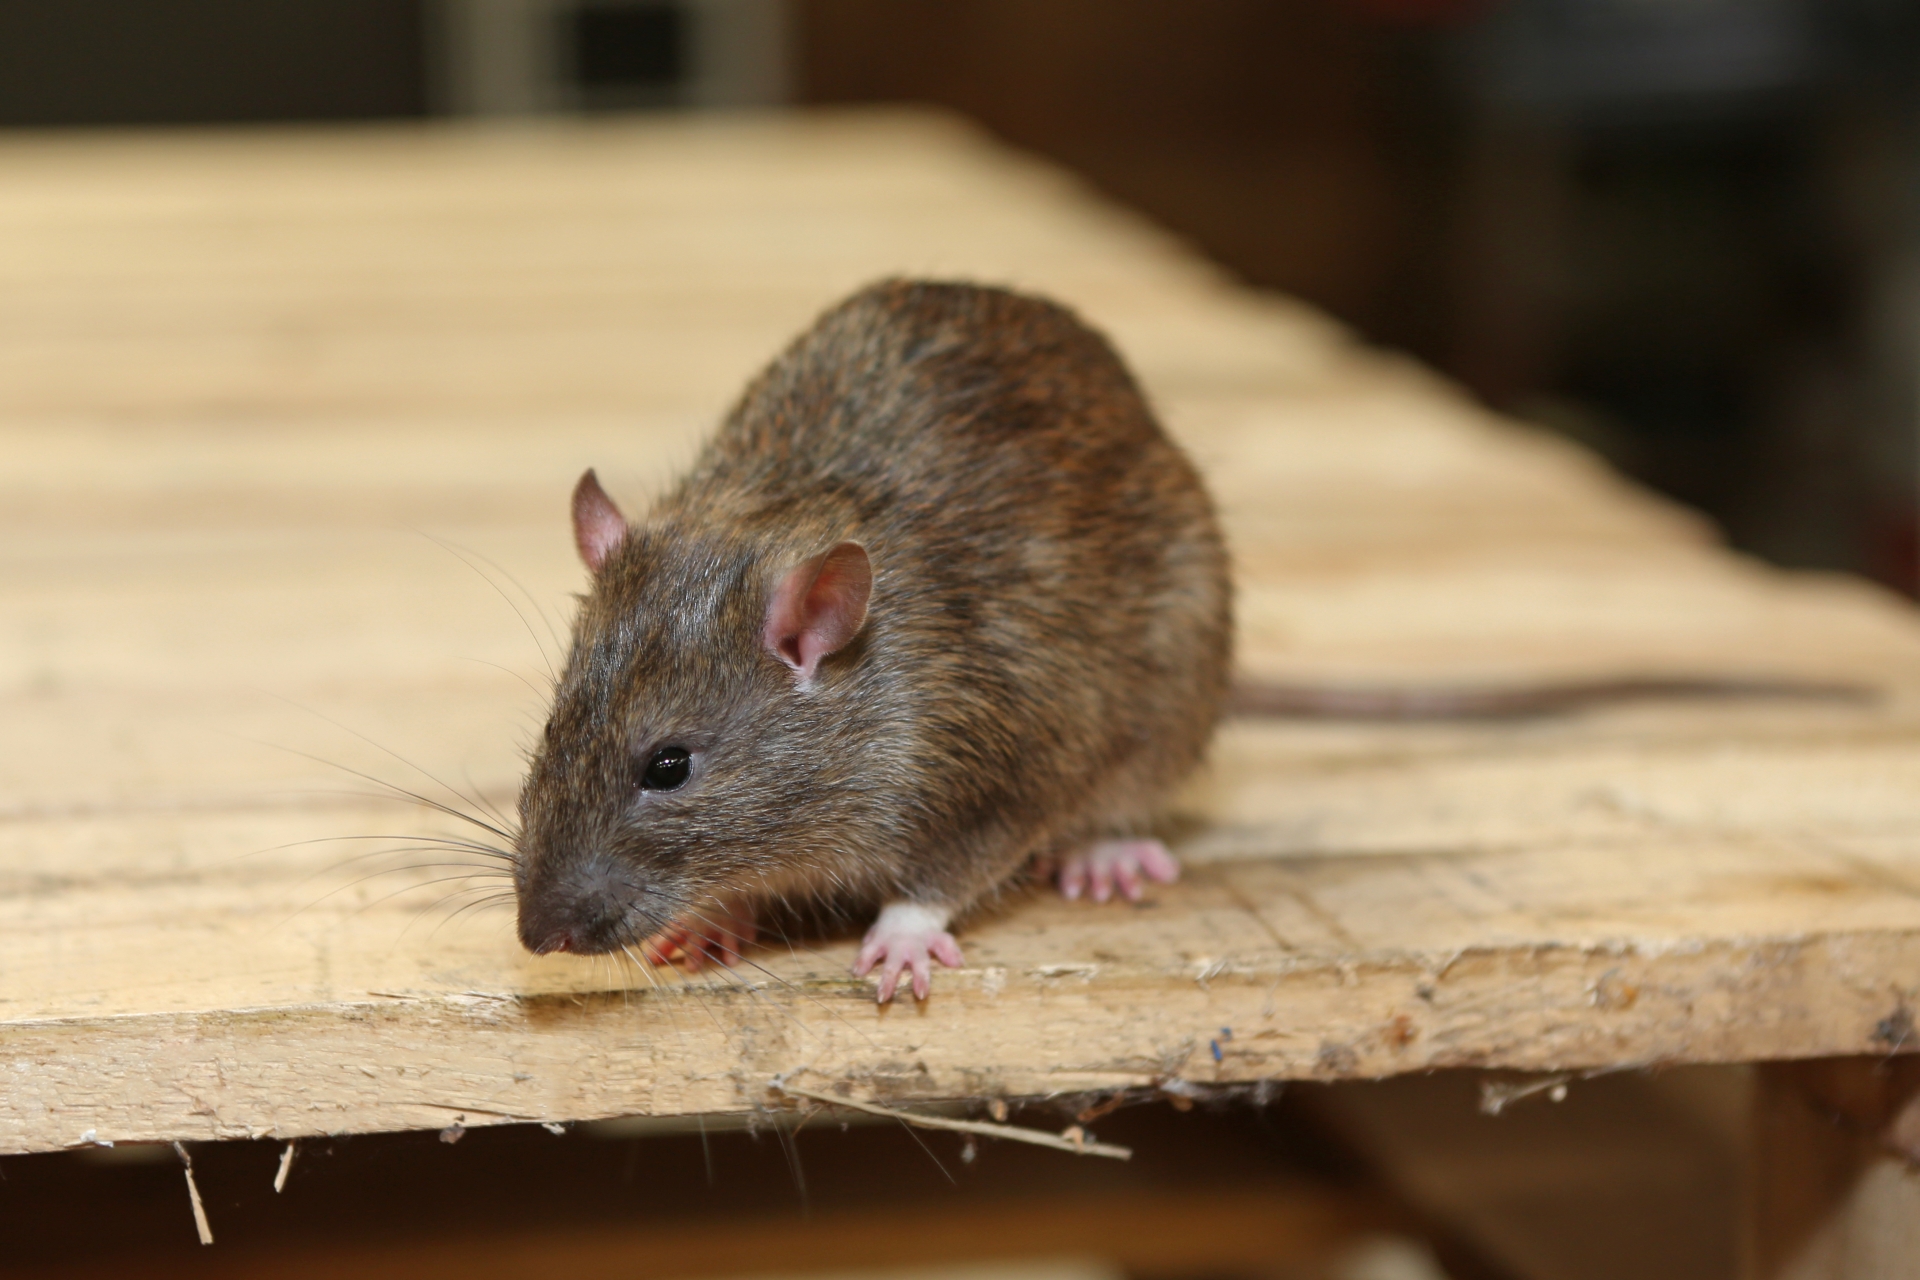 Rat extermination, Pest Control in Sidcup, DA15. Call Now 020 8166 9746